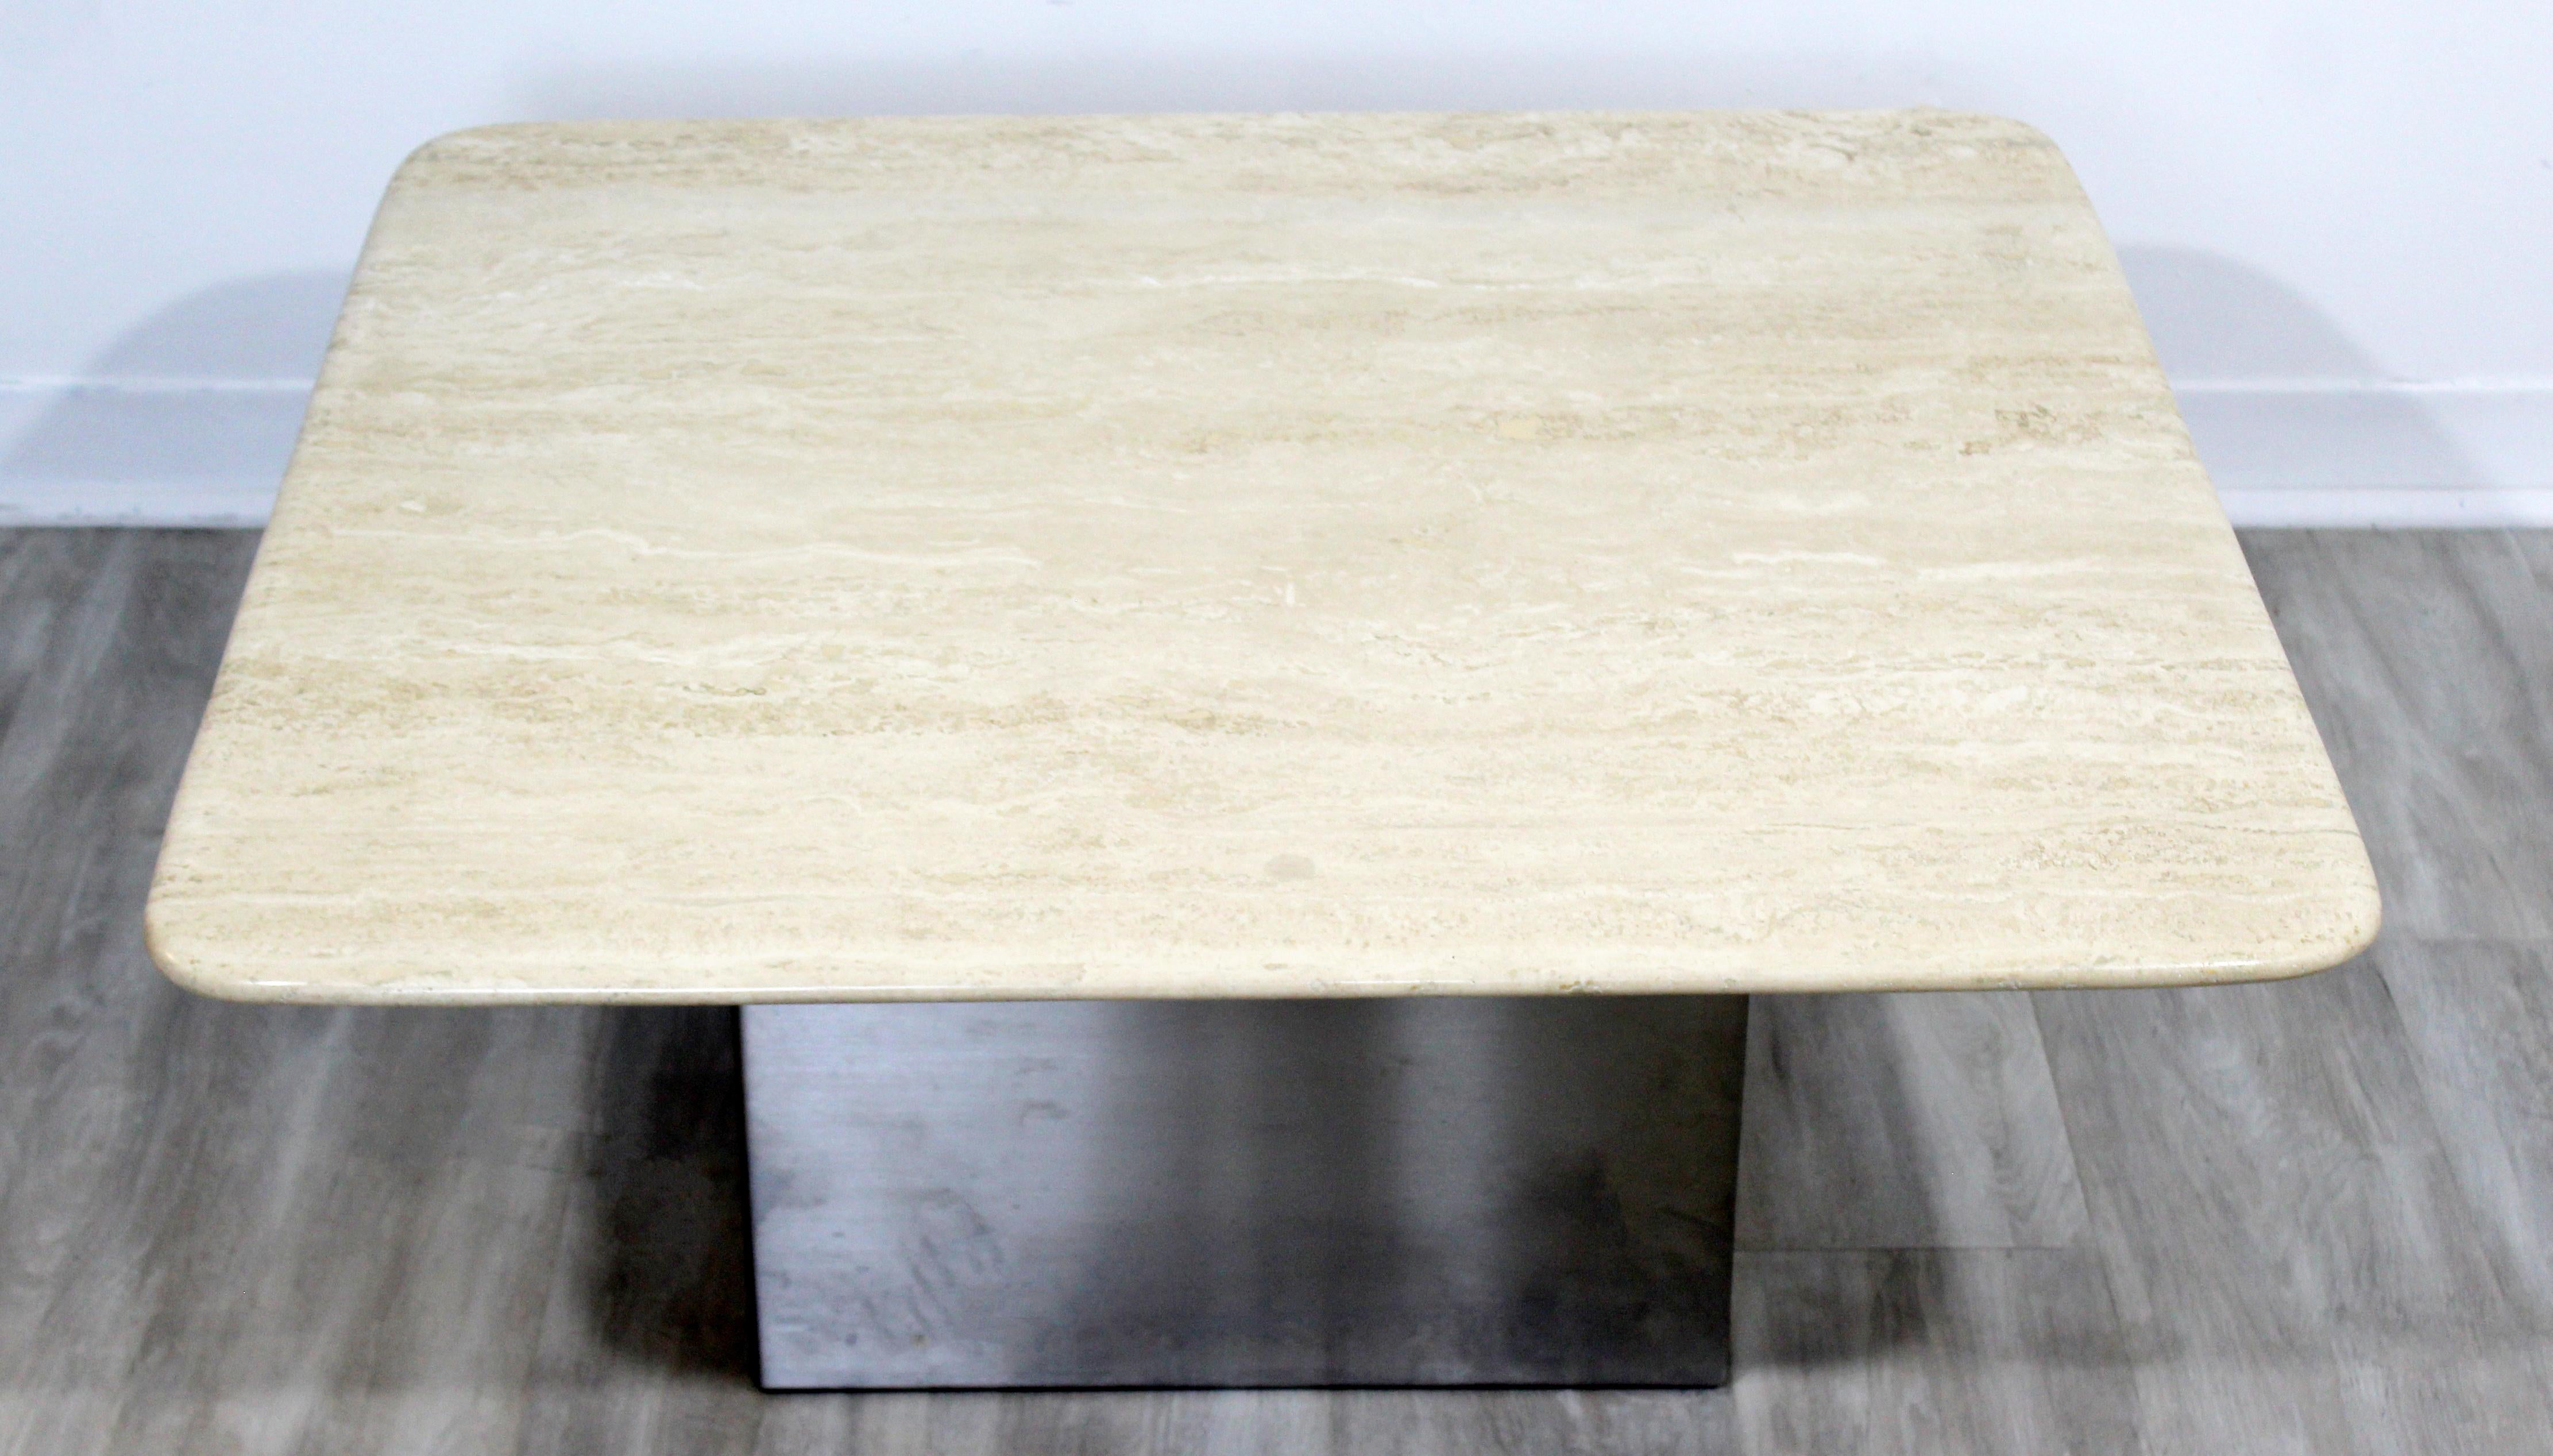 For your consideration is a sensational, square travertine topped coffee table, with steel base, in the style of Milo Baughman, circa 1960s-1970s. In excellent vintage condition. The dimensions are 35.5